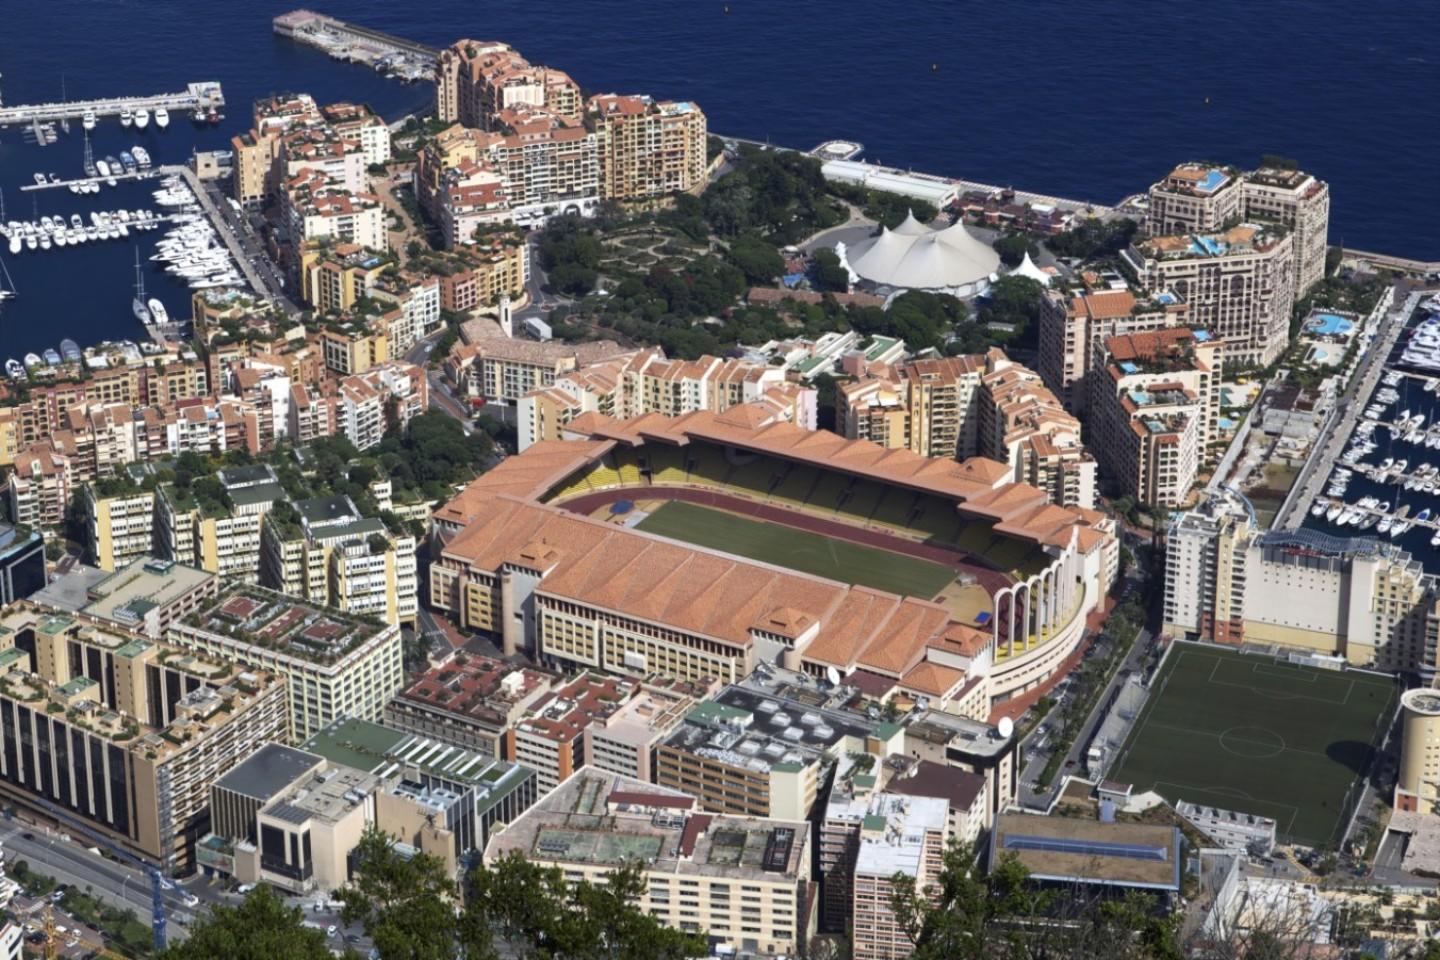 AS Monaco FC Away Games Tickets - Buy or Sell Tickets for AS Monaco FC ...